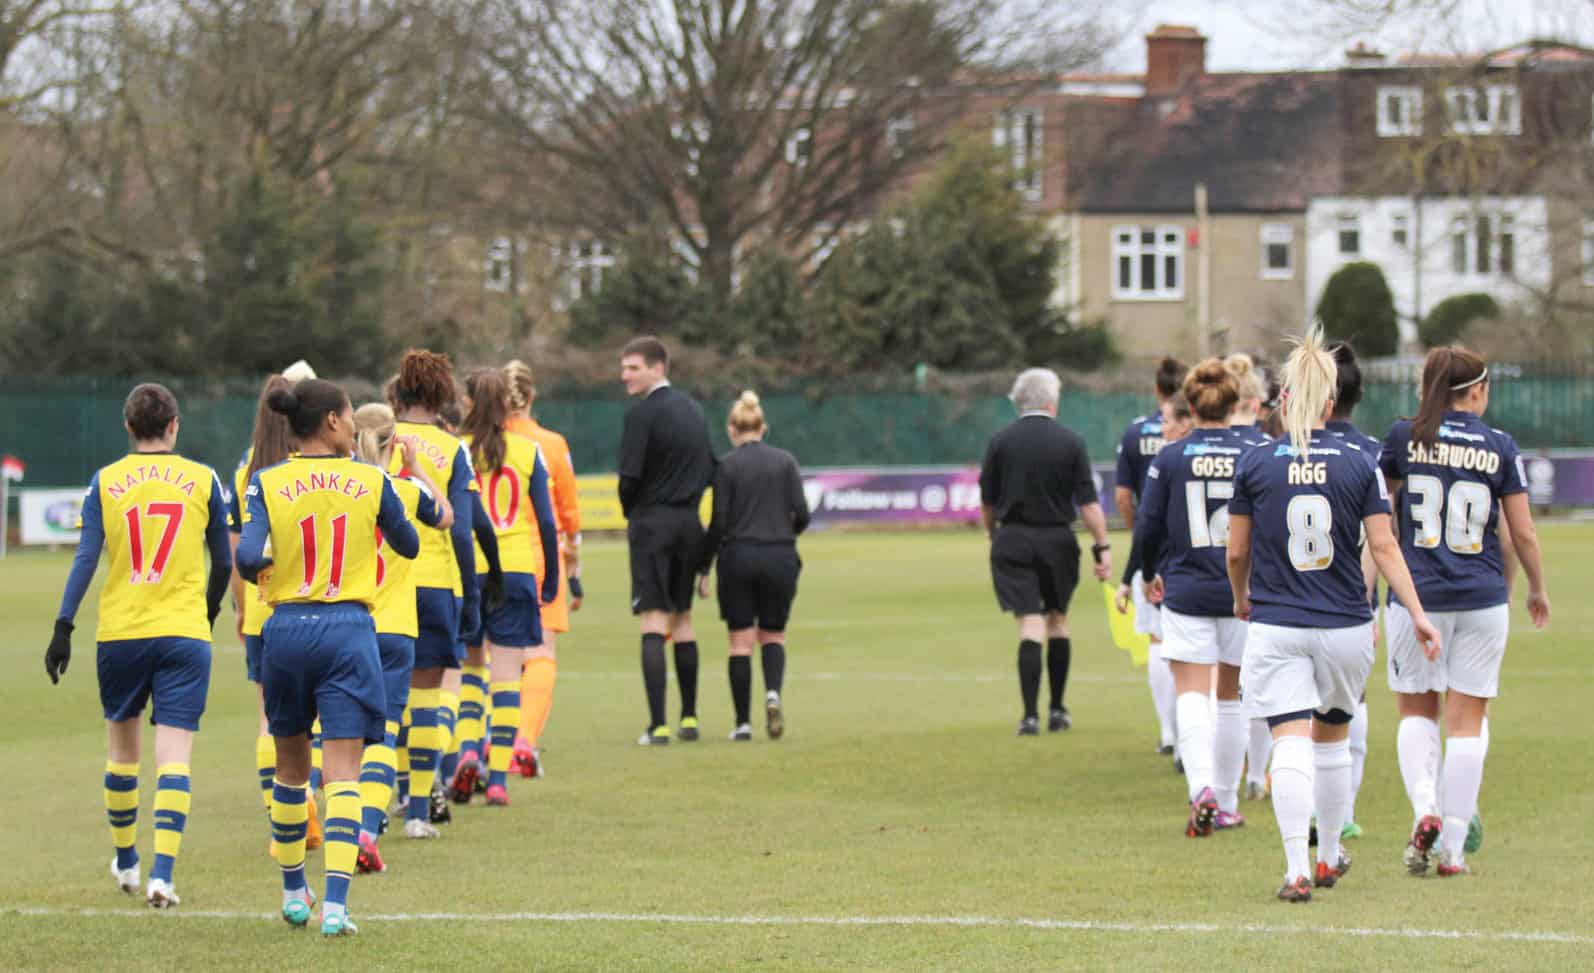 Arsenal ladies will be back to play Millwall this season